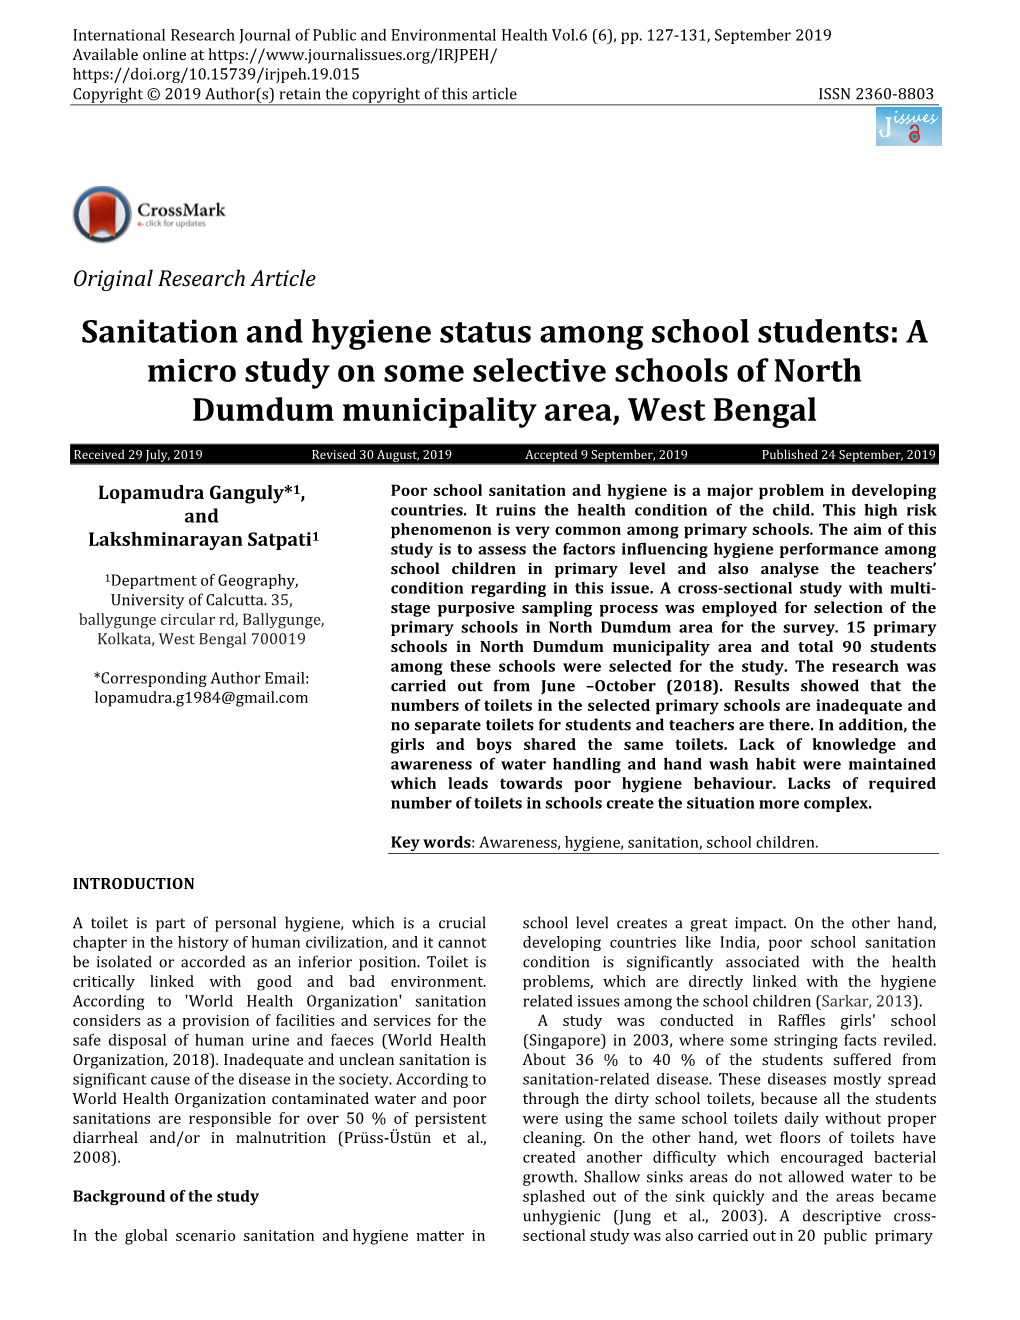 Sanitation and Hygiene Status Among School Students: a Micro Study on Some Selective Schools of North Dumdum Municipality Area, West Bengal